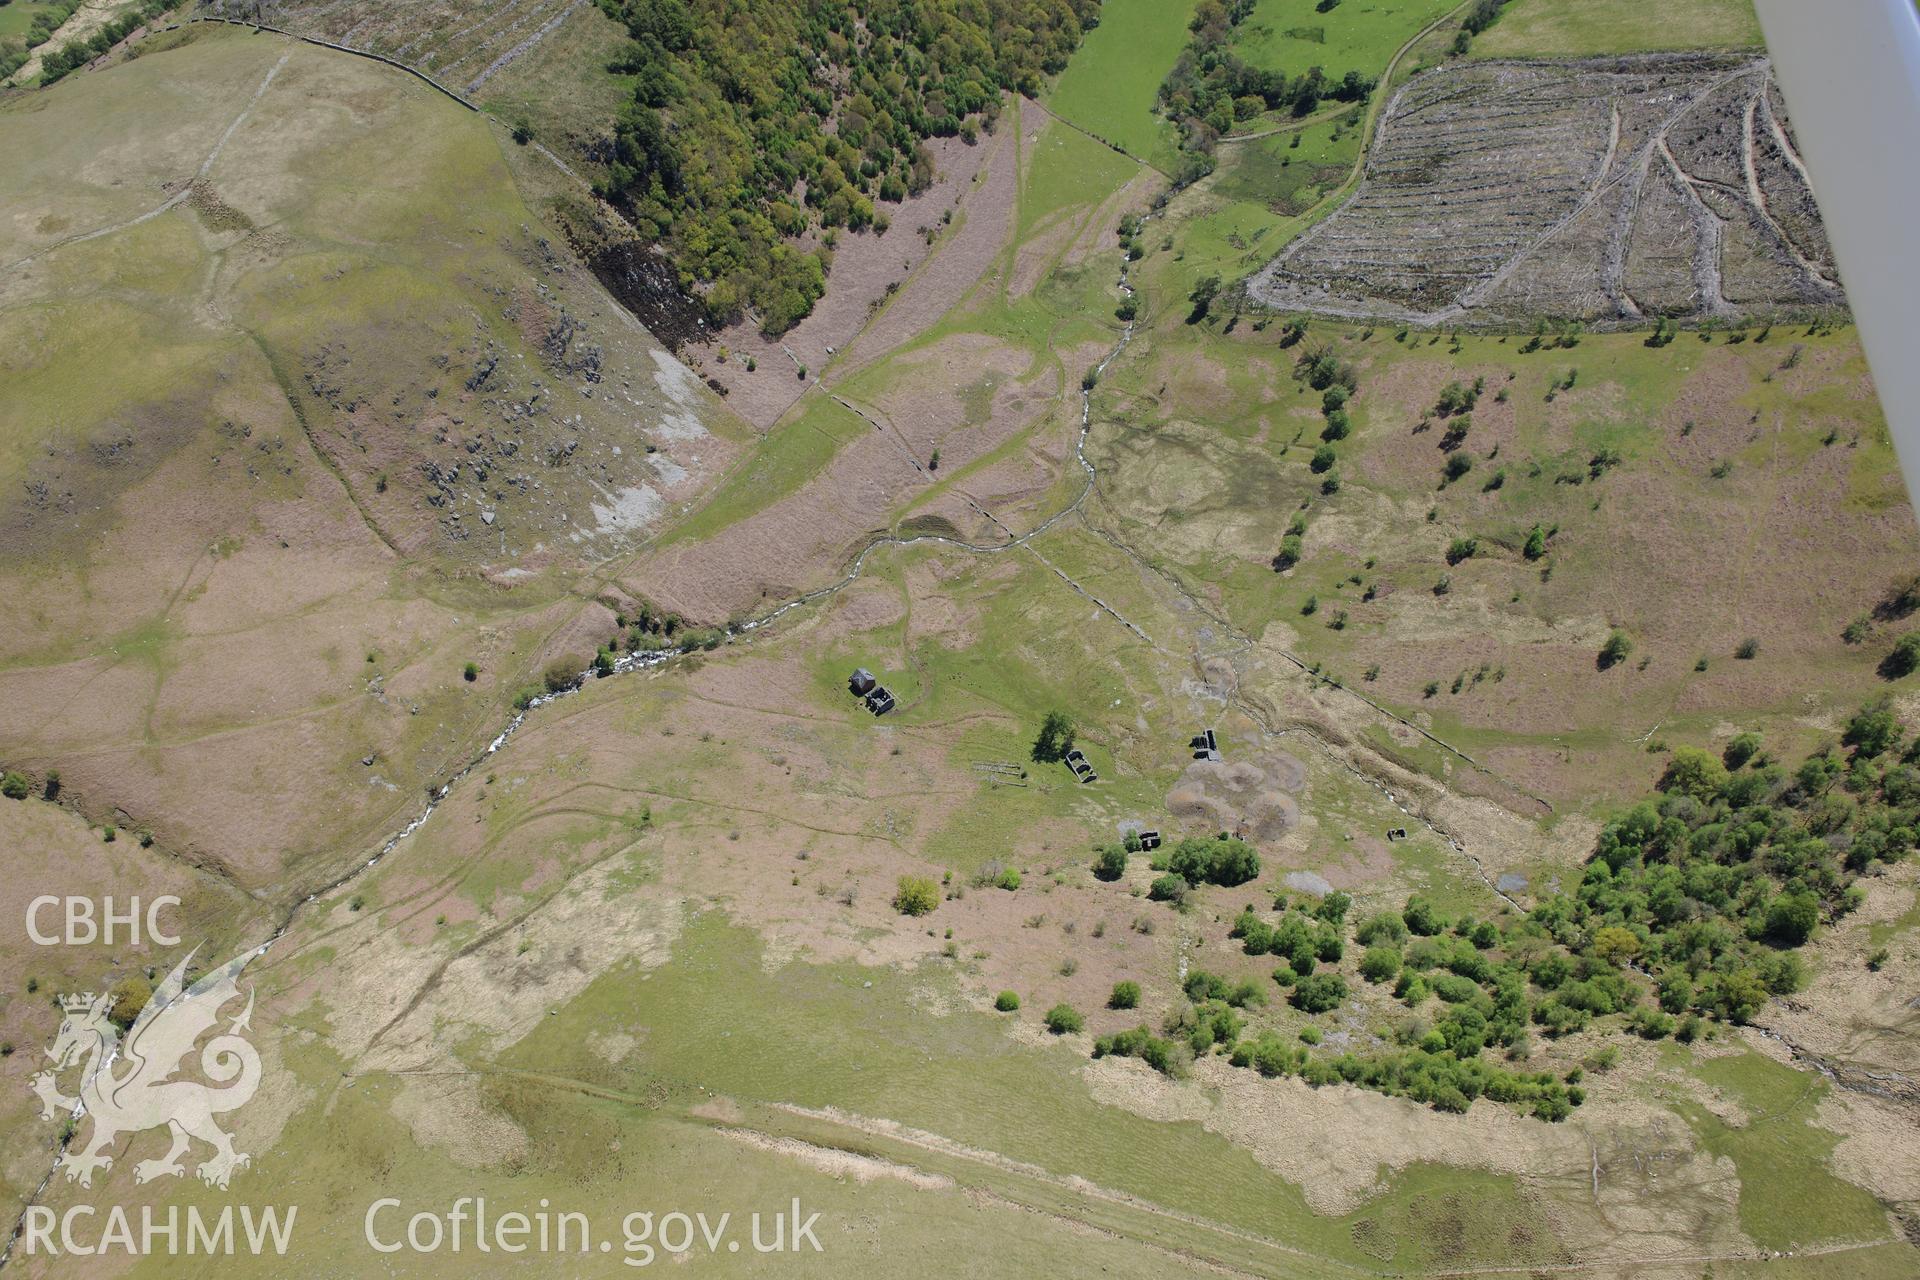 Cwm Elan lead mine complex, including the remains of a house, office, quarry, mine shaft and wheel pit. Oblique aerial photograph taken during the Royal Commission's programme of archaeological aerial reconnaissance by Toby Driver on 3rd June 2015.